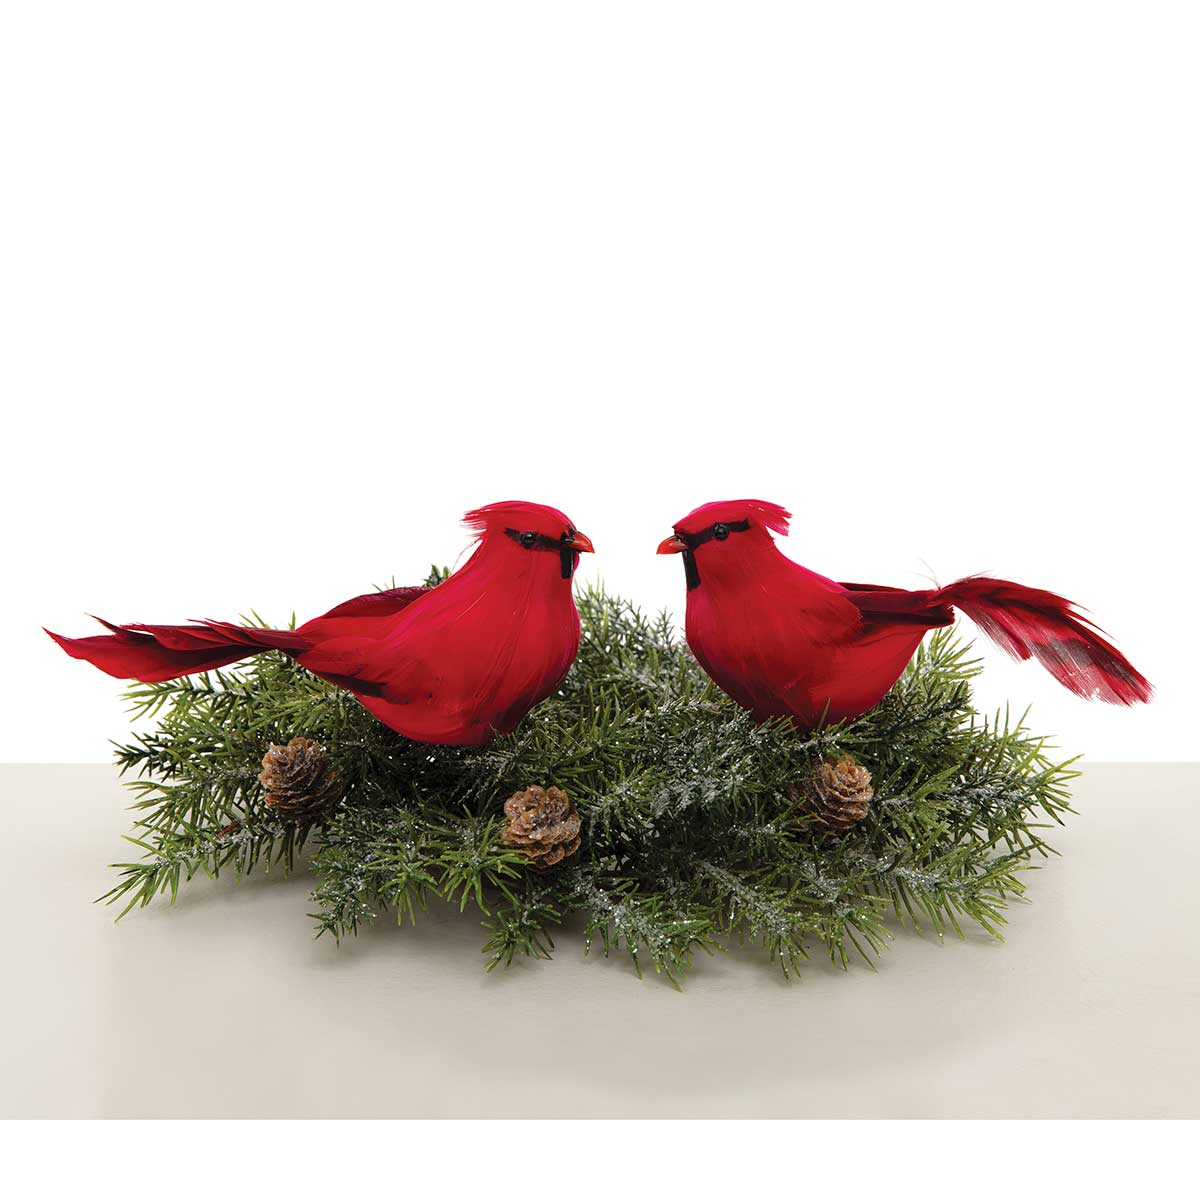 CARDINAL 2 ASSORTED 6.5IN X 2IN X 2.5IN RED/BLACK WITH METAL CLI - Click Image to Close